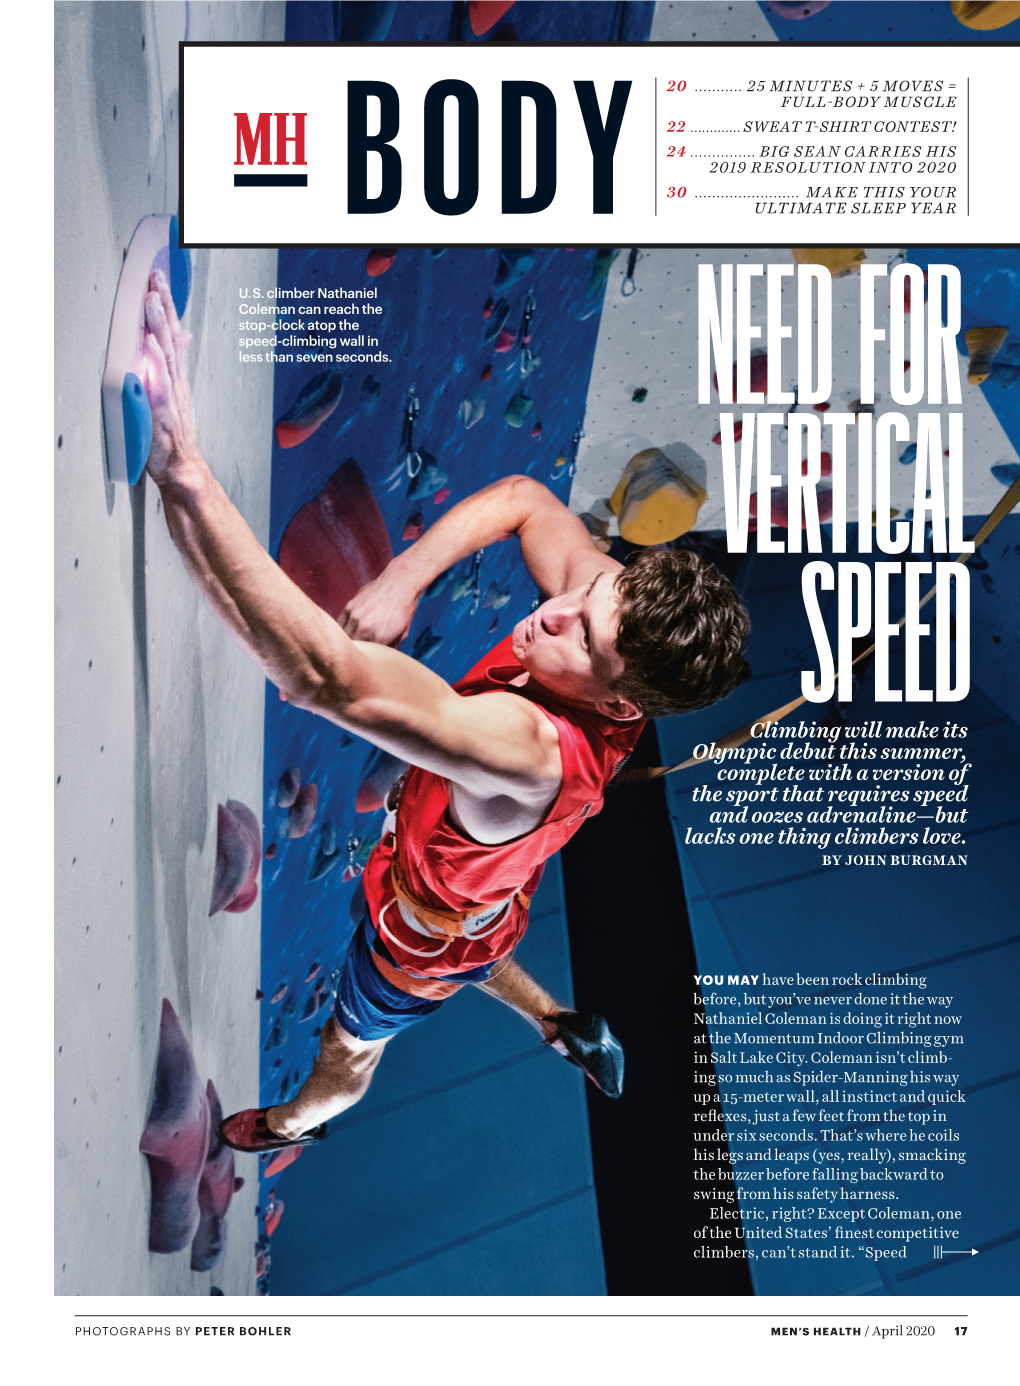 Climbing Will Make Its Olympic Debut This Summer, Complete with a Version of the Sport That Requires Speed and Oozes Adrenaline—But Lacks One Thing Climbers Love